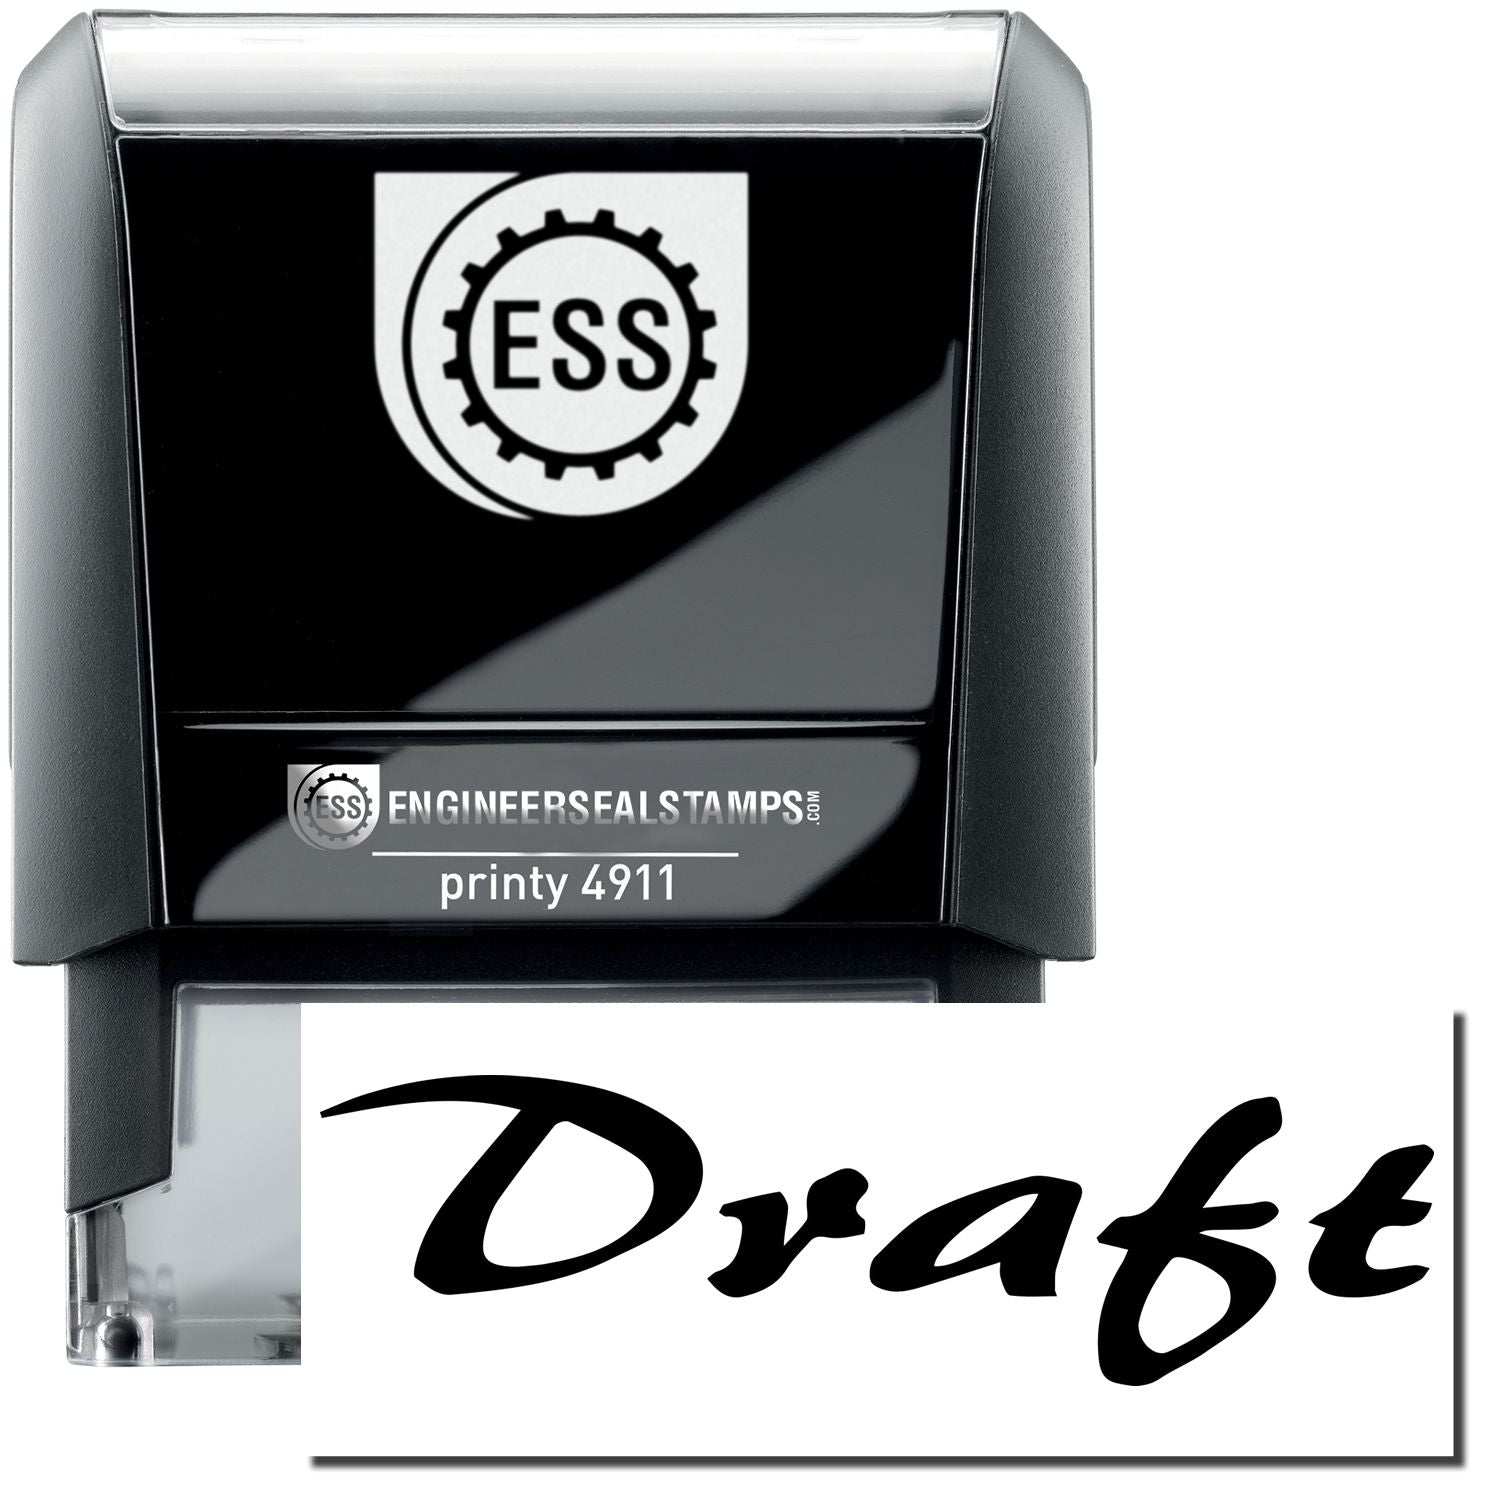 A self-inking stamp with a stamped image showing how the text "Draft" in a cursive font is displayed after stamping.